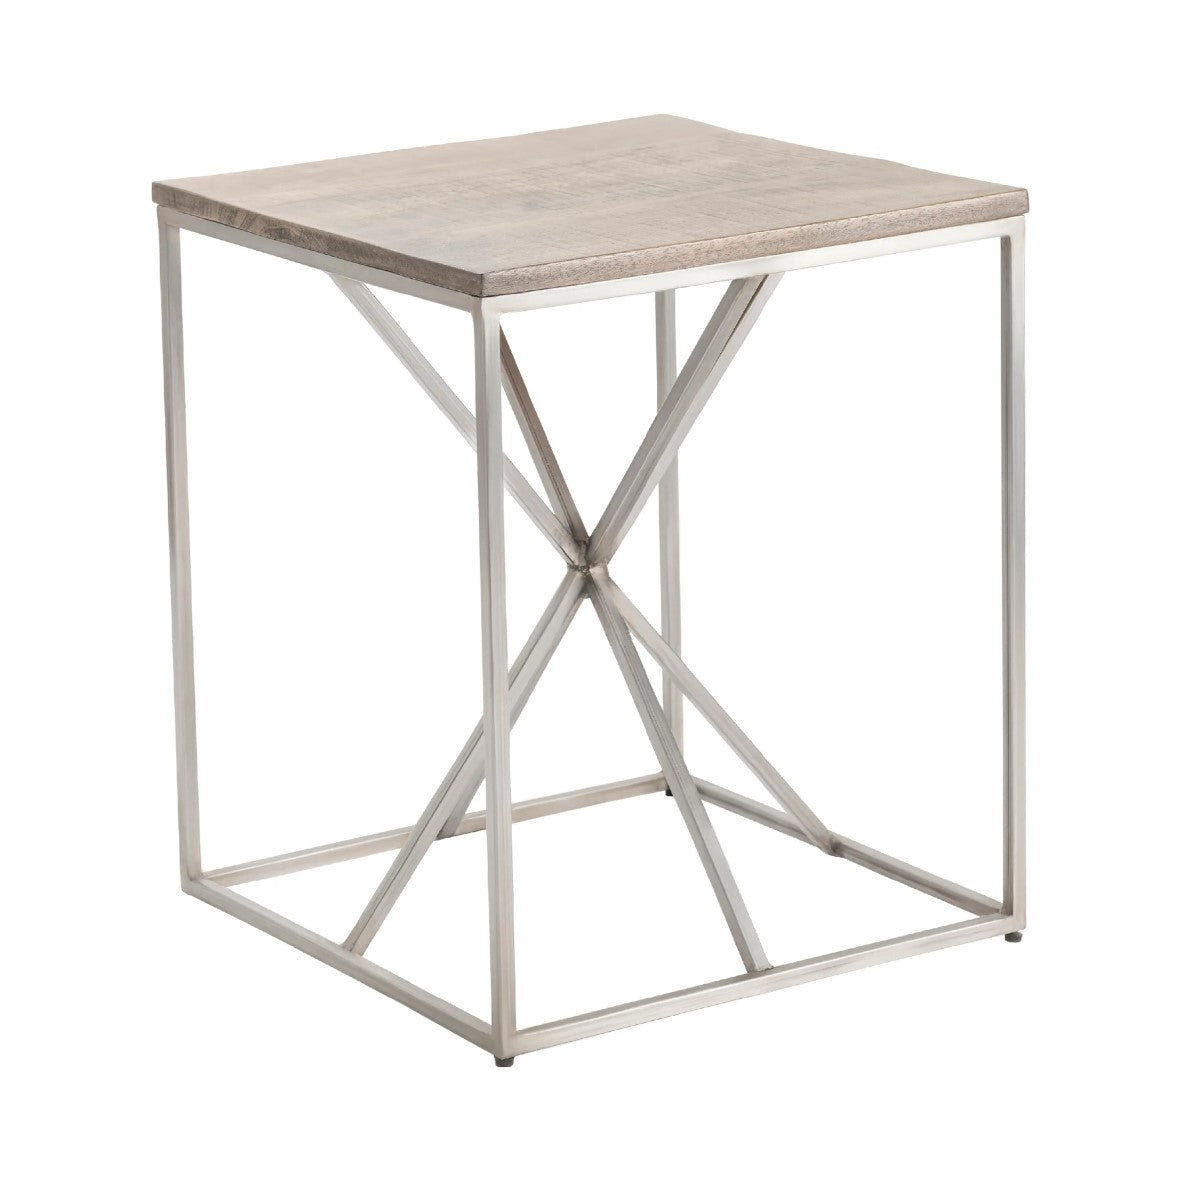 Crestview Collection Bengal Manor 20" x 20" x 24" Occasional Rough Mango Wood And Iron Asterisk Square End Table In Natural Wood and Metal Finish